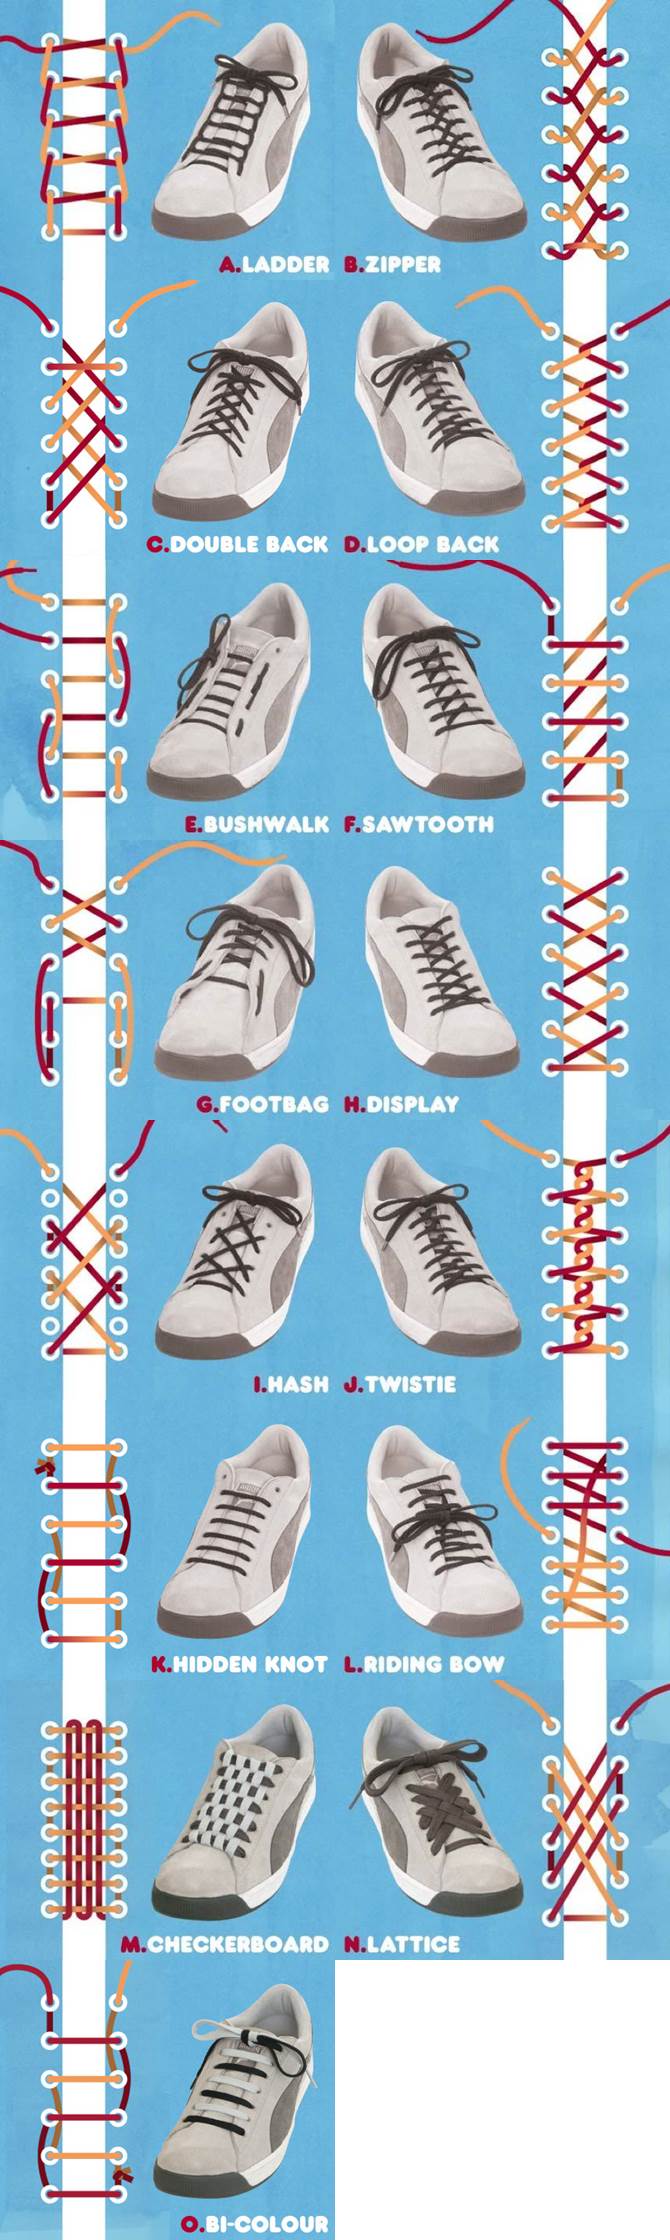 cool ways to tie shoes